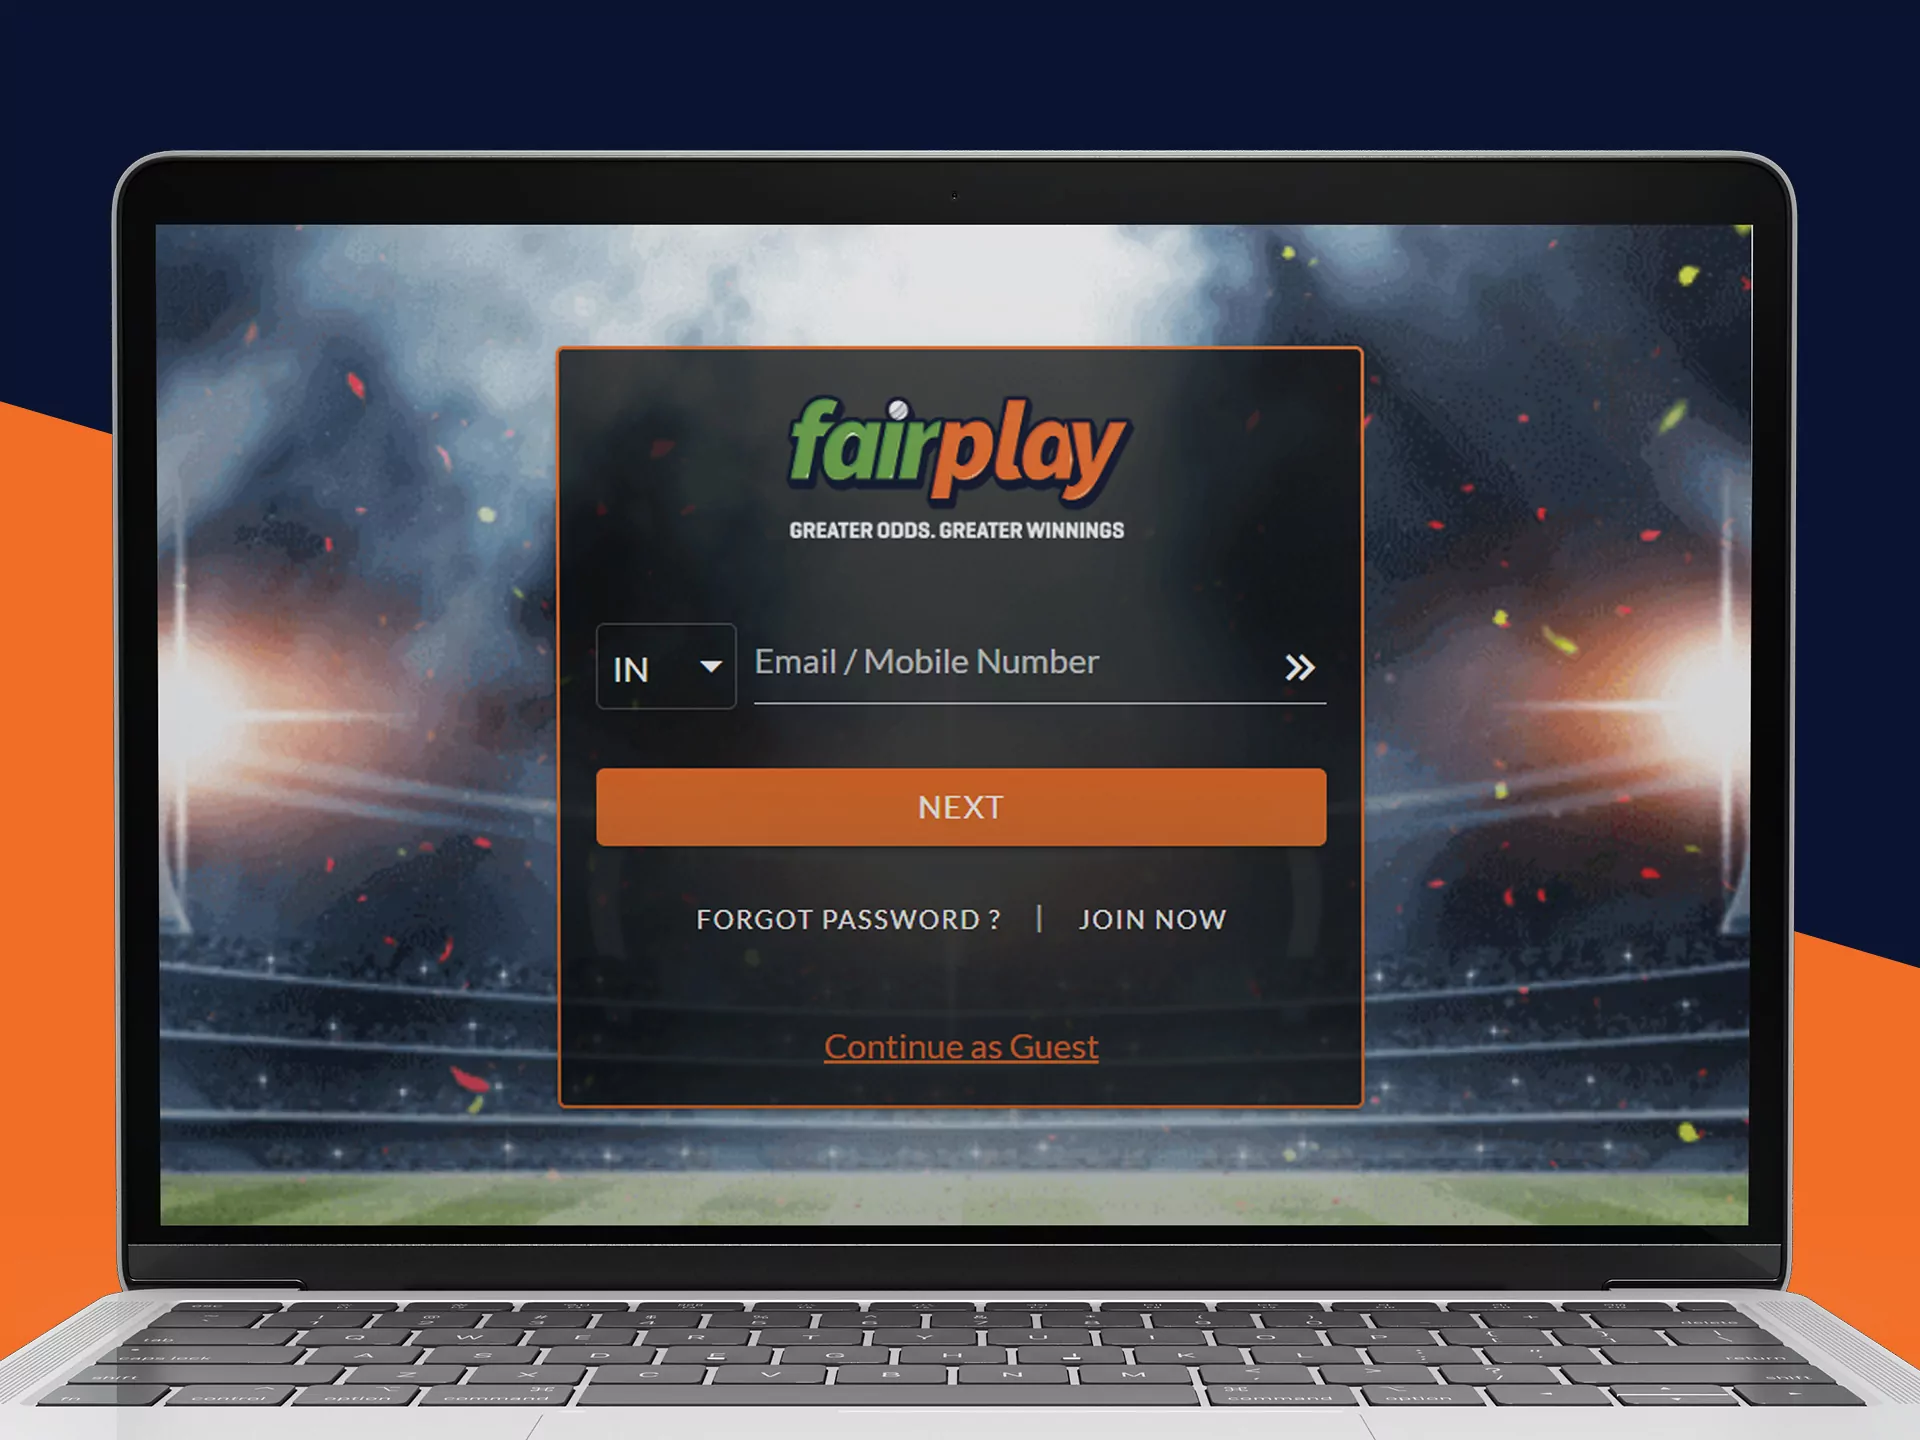 Enter your data and to get access to Fairplay.